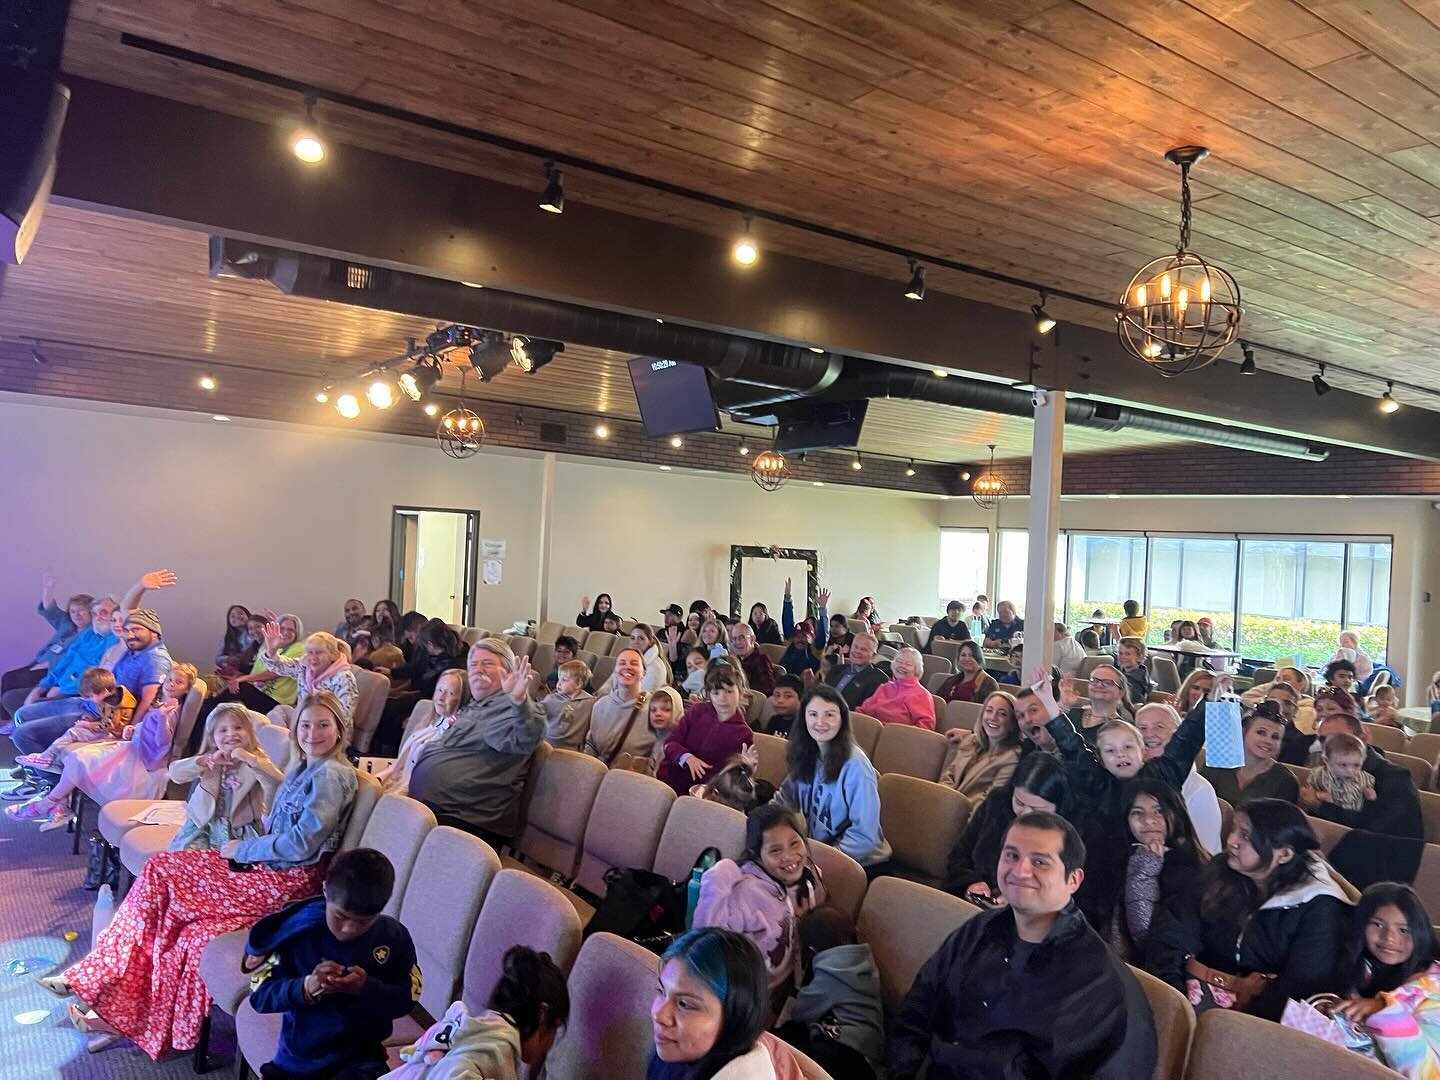 Great worship service today! He is risen!! #theconnectionoc #welovelakeforest #loveserveconnect #wearefoursquare